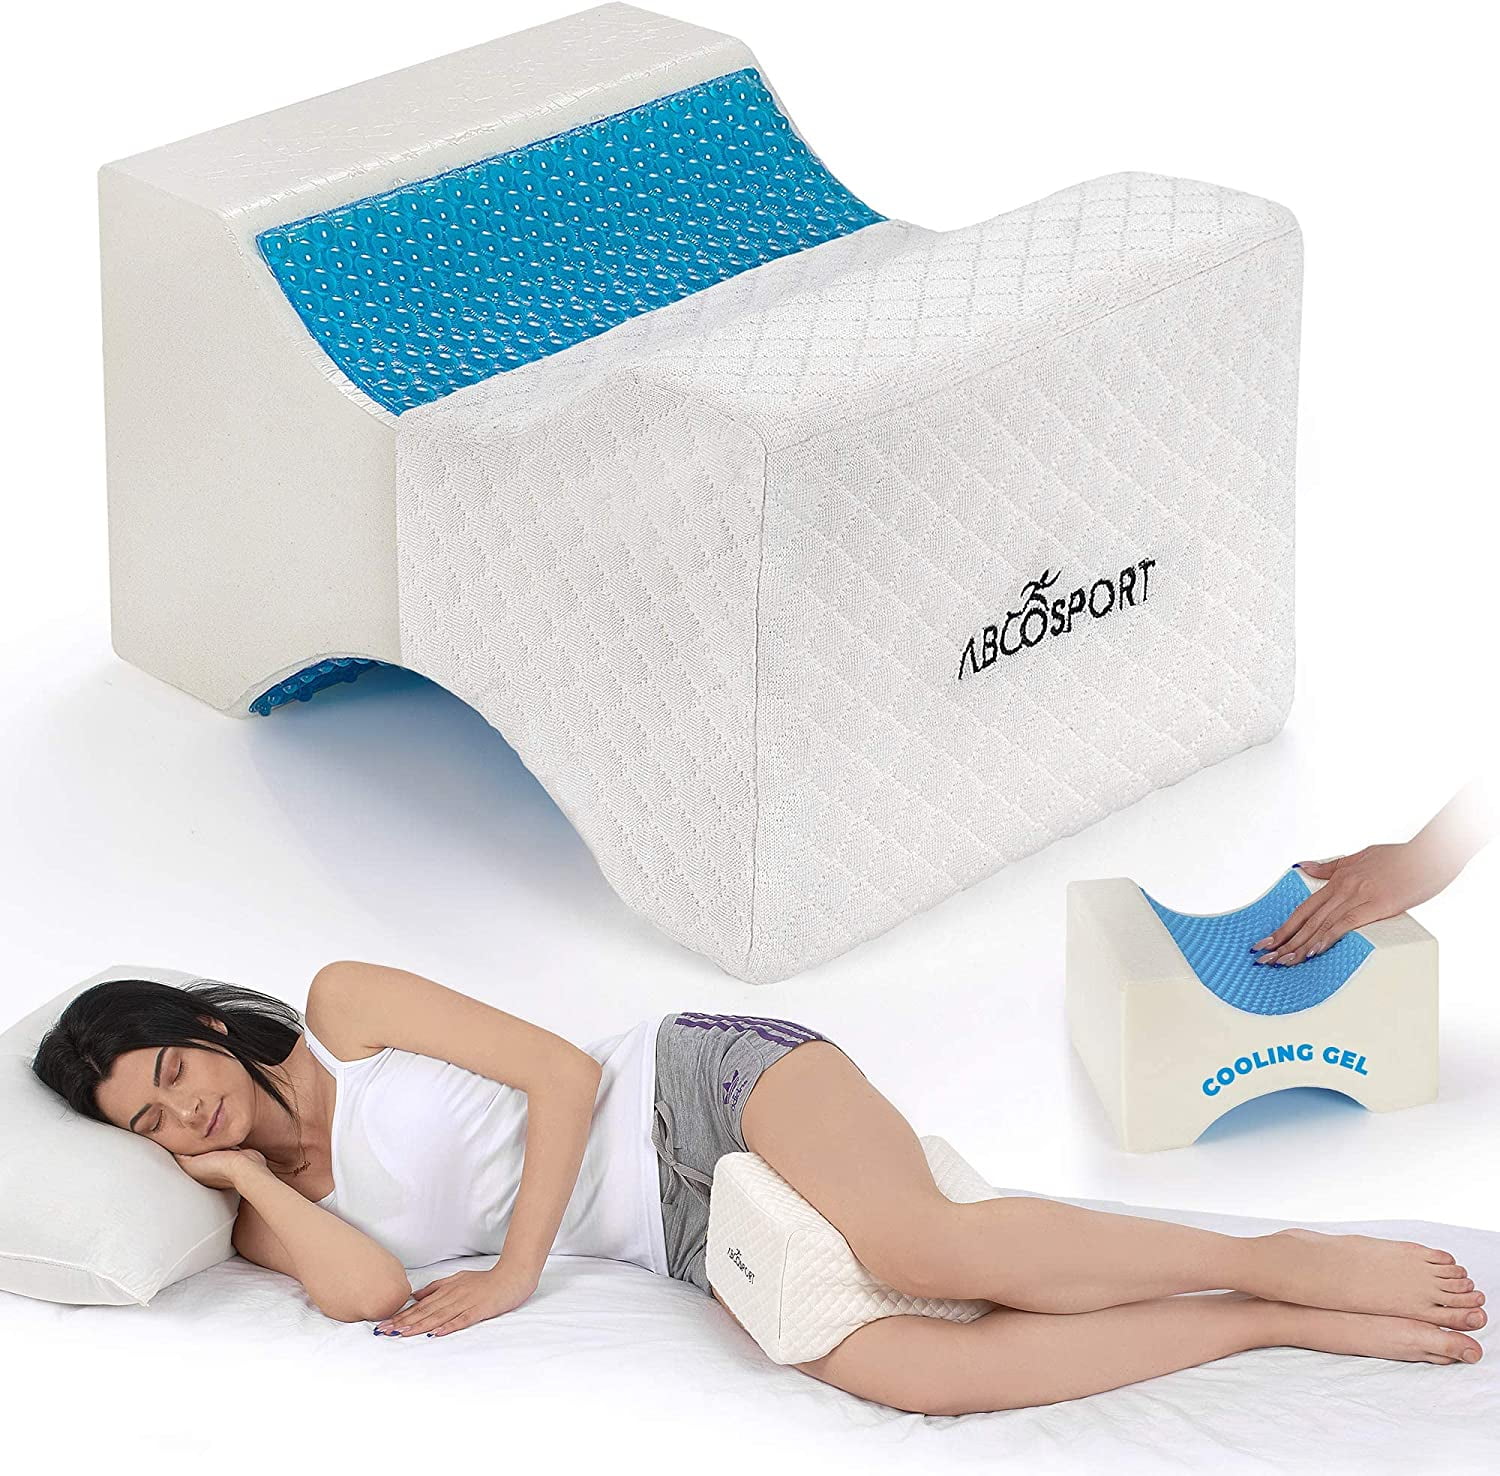 Improve your sleep quality by using a knee pillow while you sleep. - Back  Support Systems